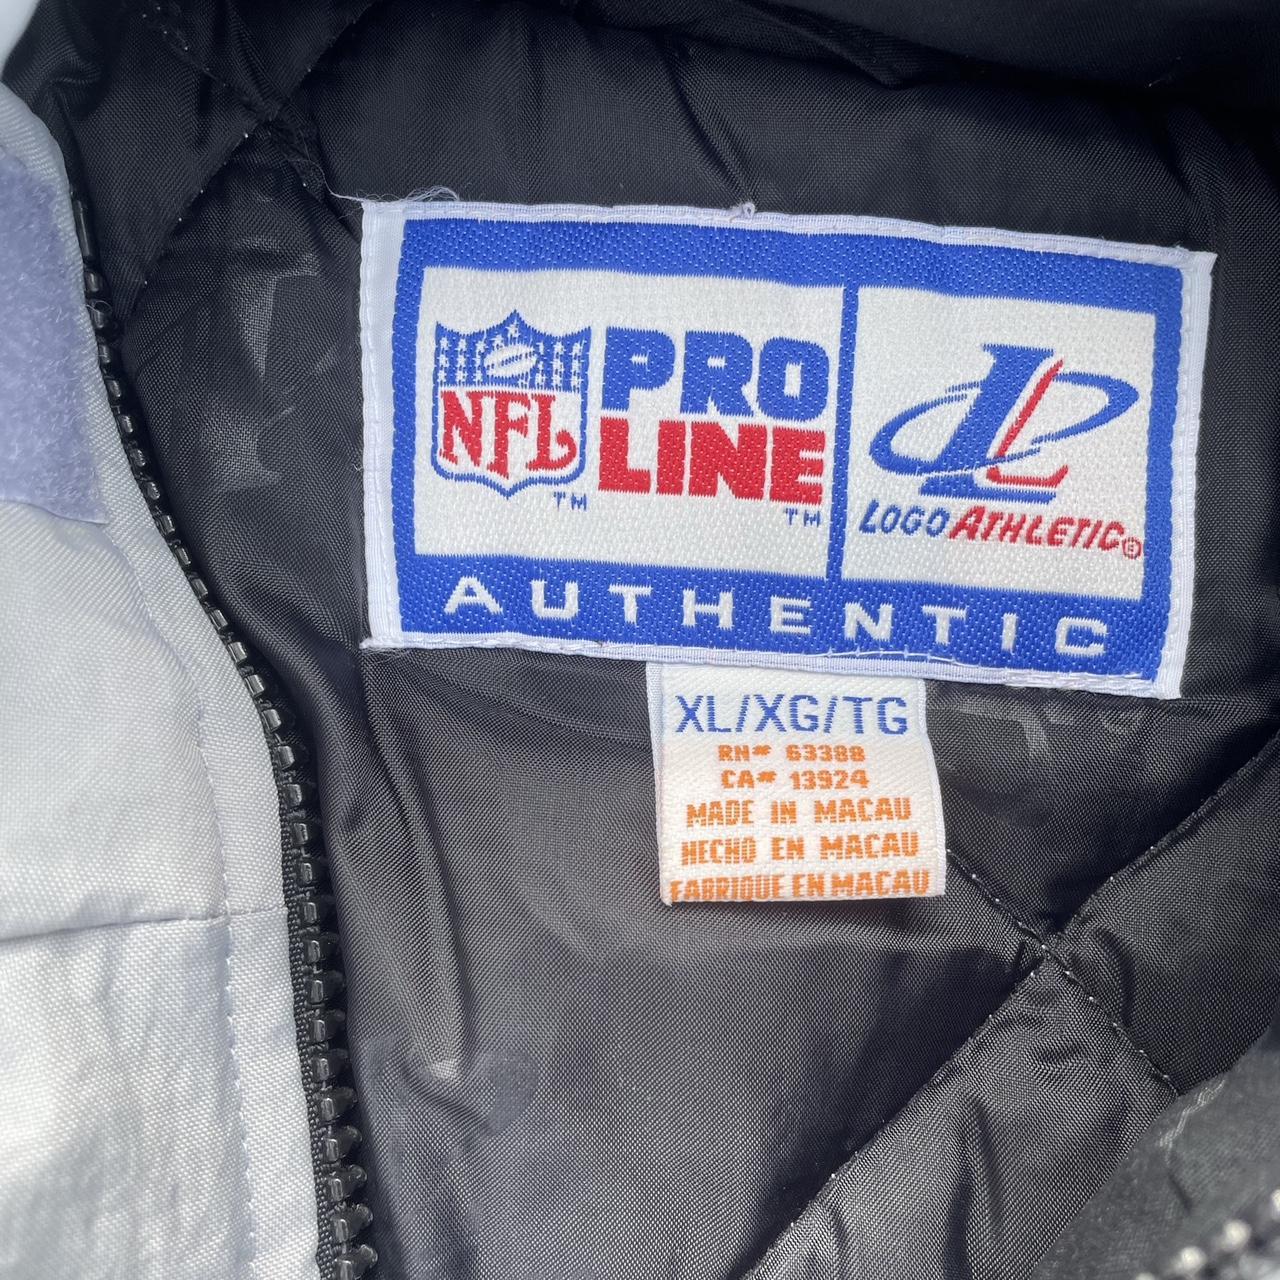 Depop on X: The ACTUAL Oakland Raiders jacket from the movie